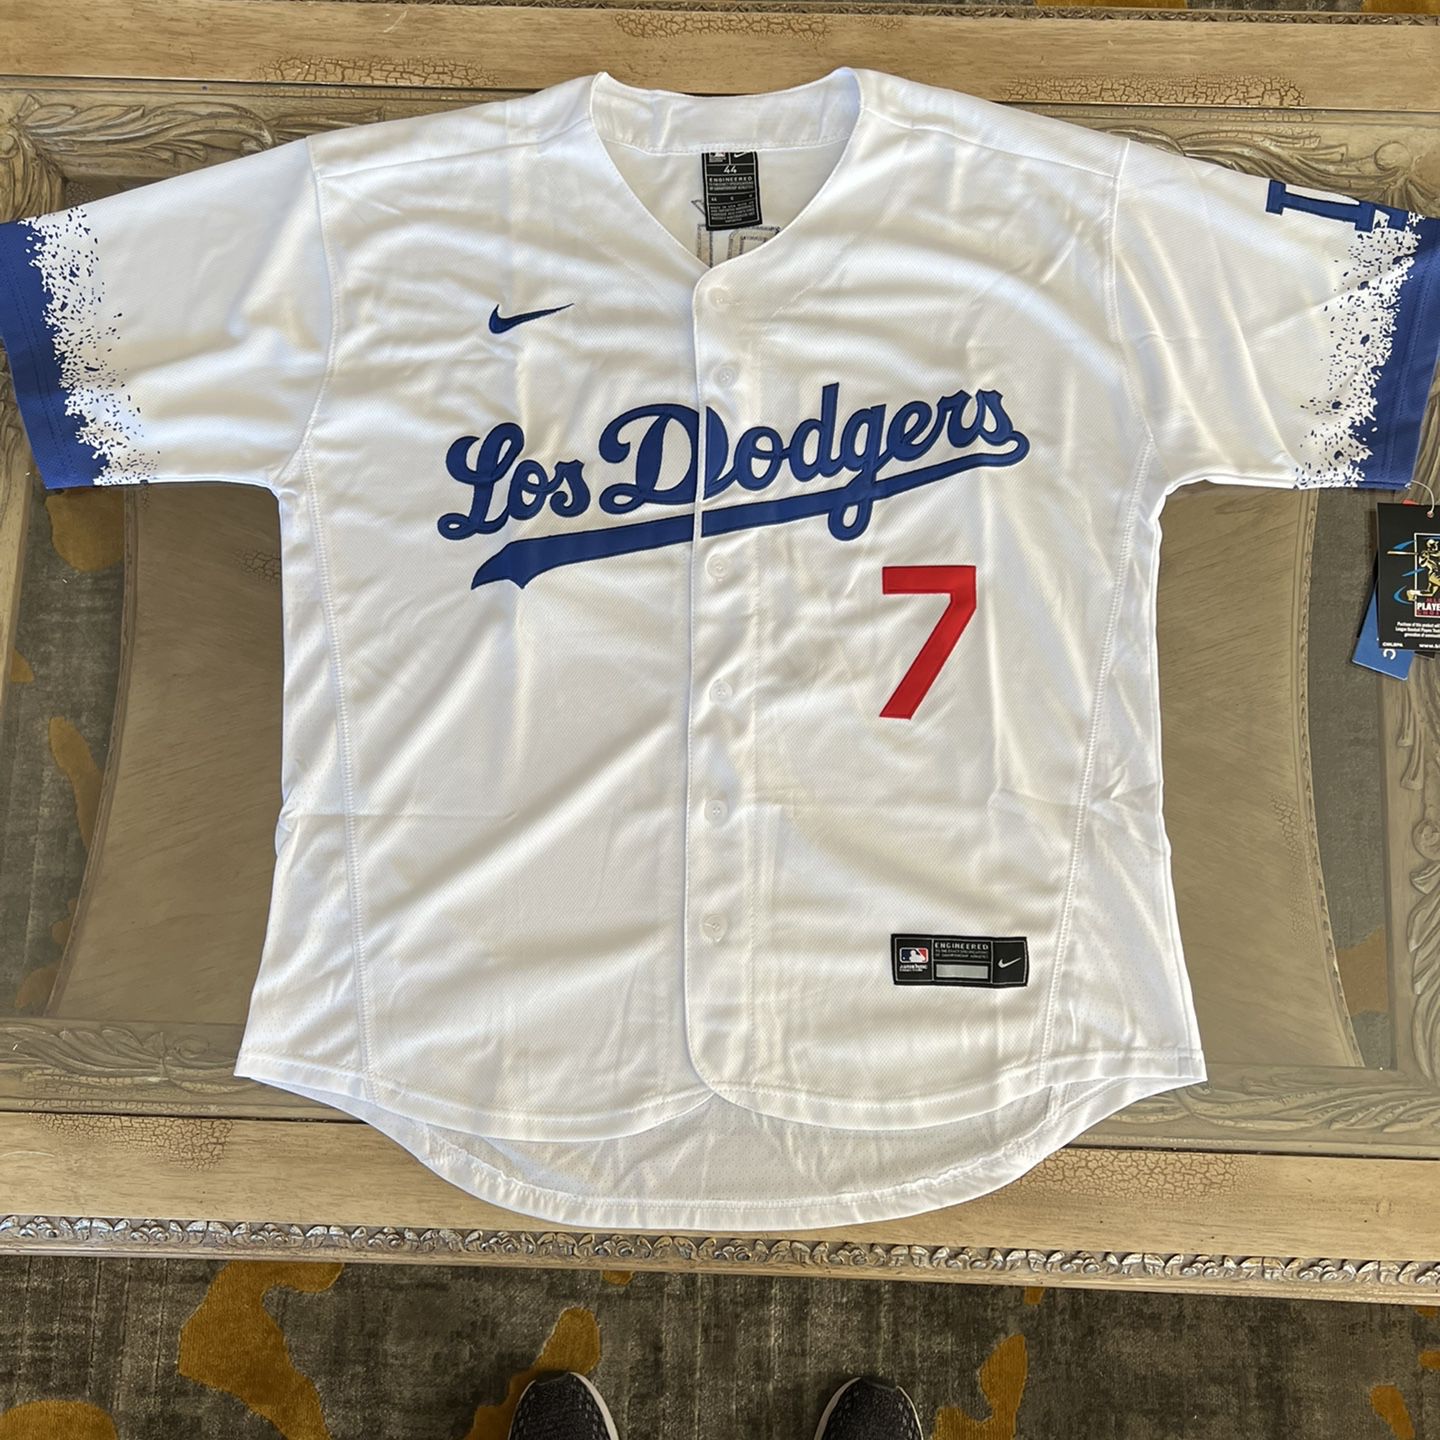 Dodgers Julio Urias 7 Jersey Authentic for Sale in Whittier, CA - OfferUp